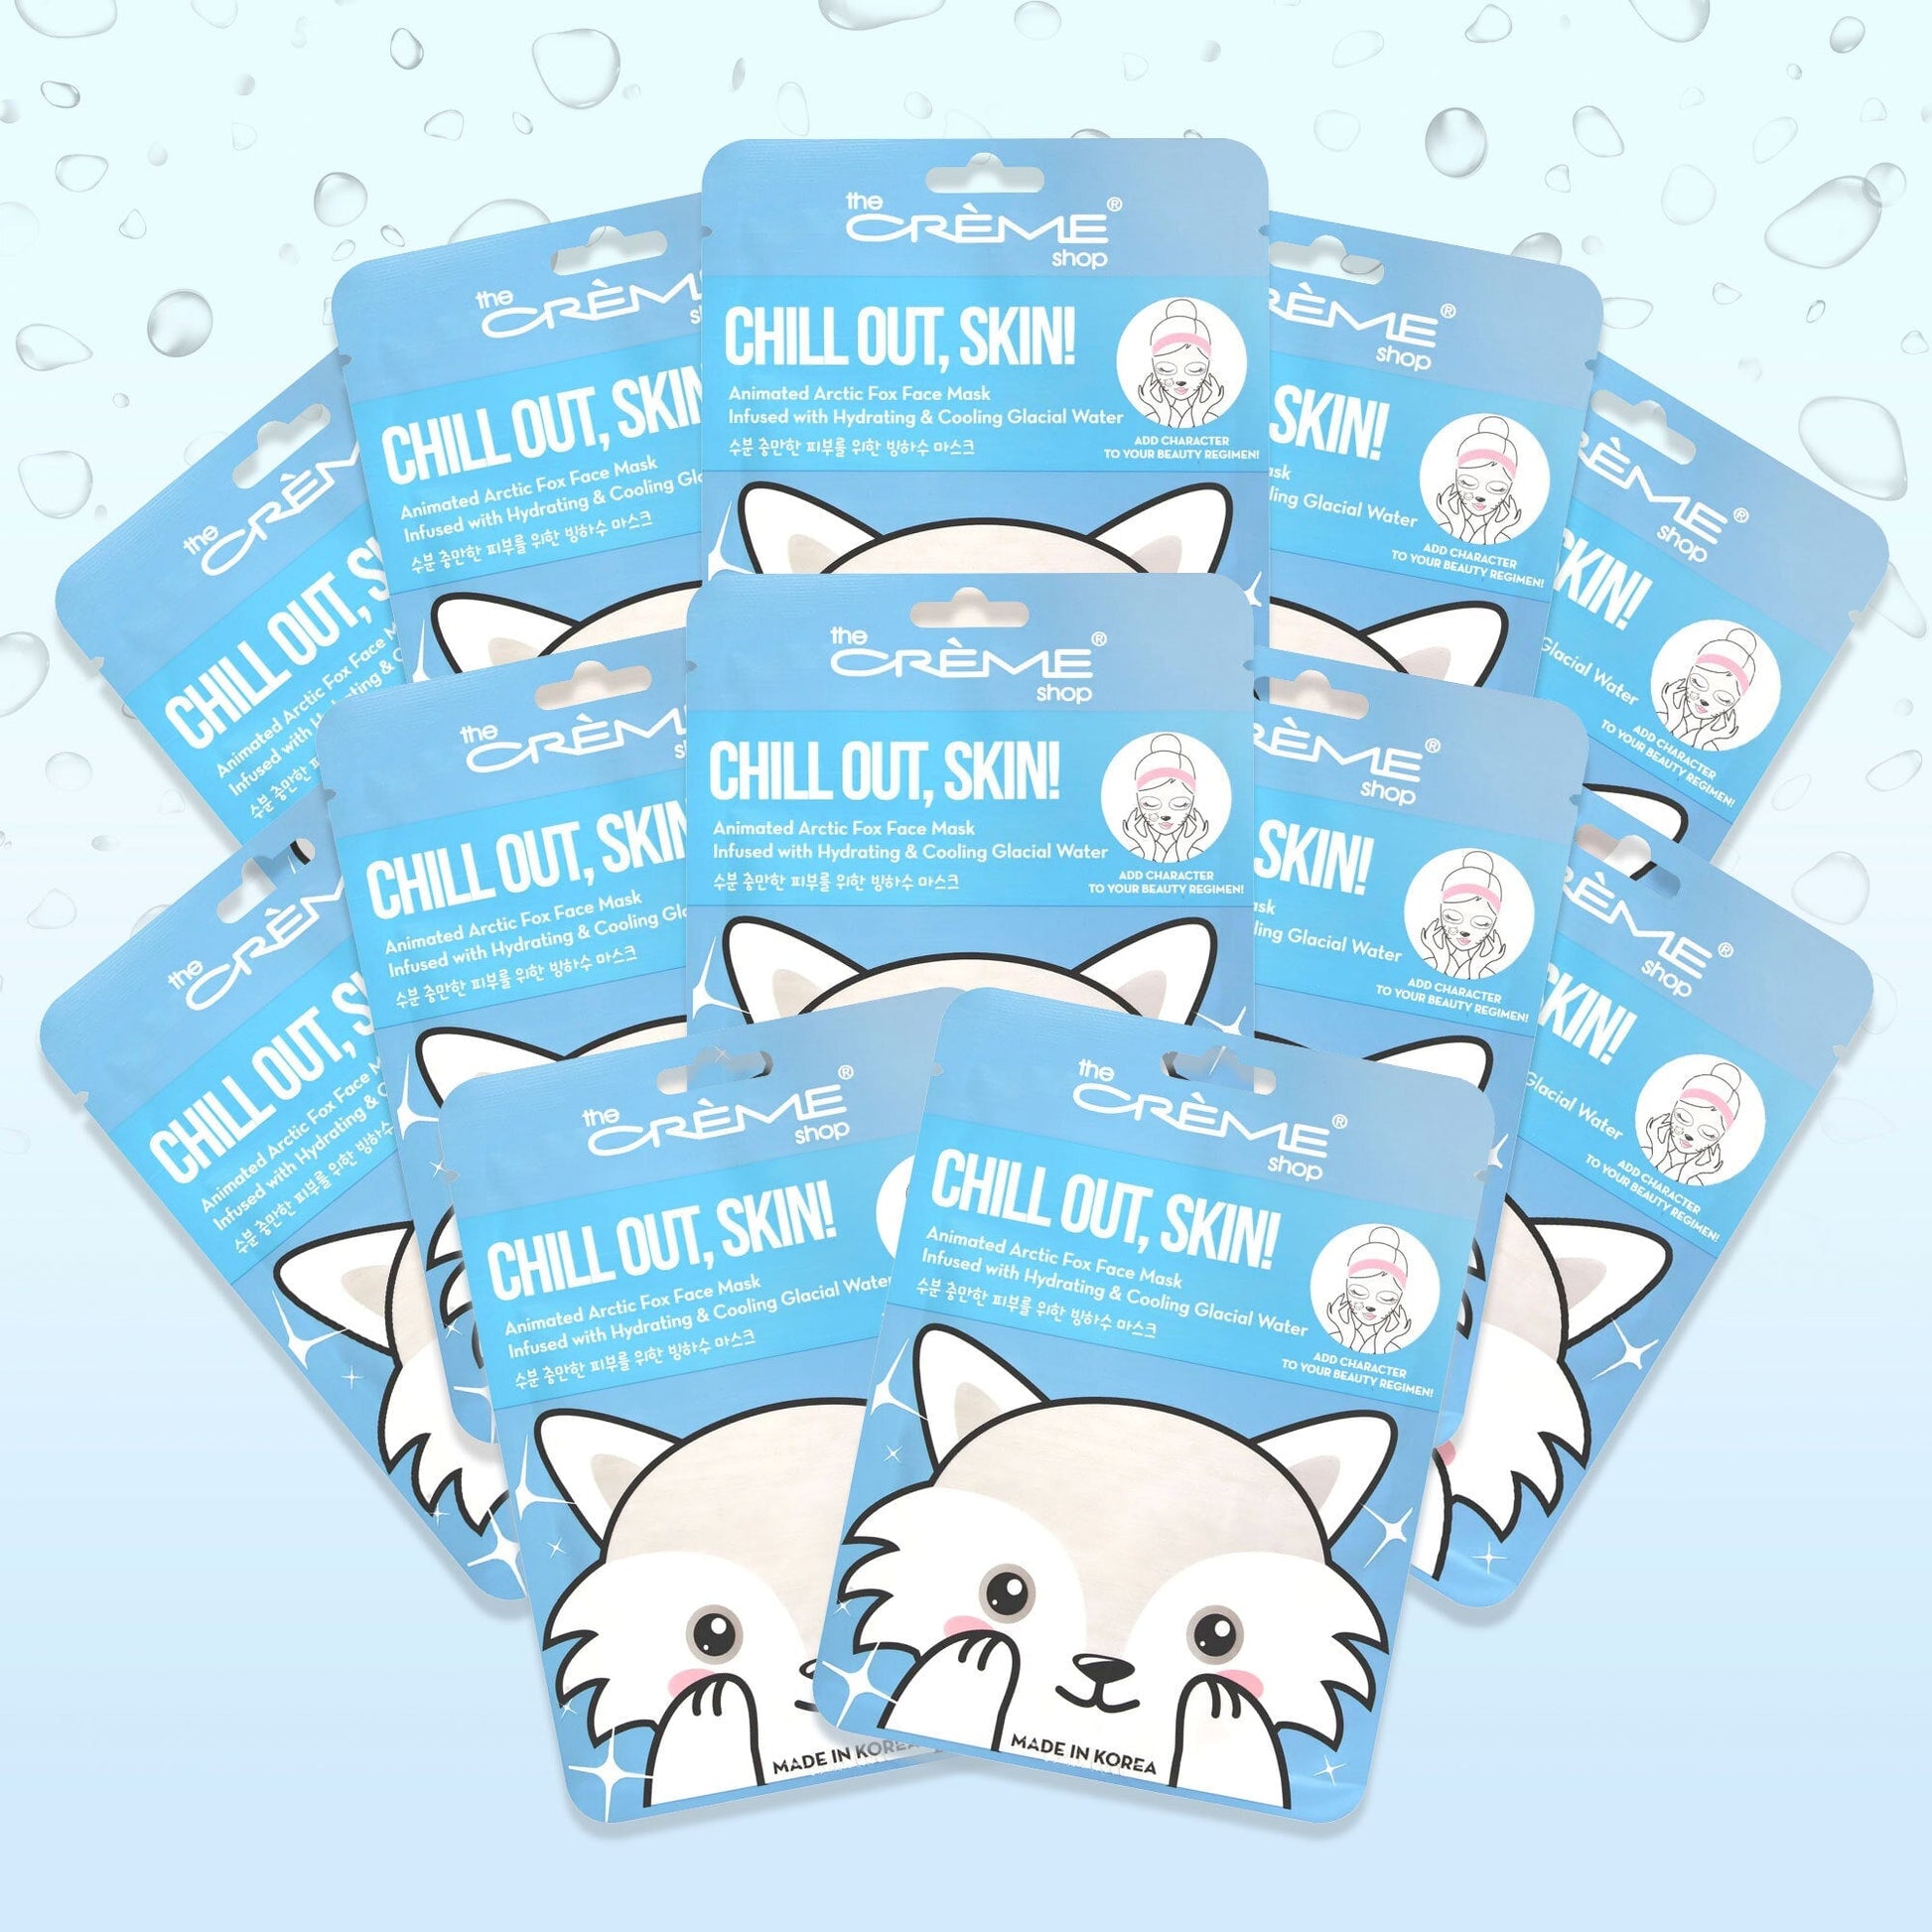 Chill Out, Skin! Animated Arctic Fox Face Mask - Hydrating & Cooling Glacial Water (Set of 12) Animated Sheet Masks The Crème Shop 